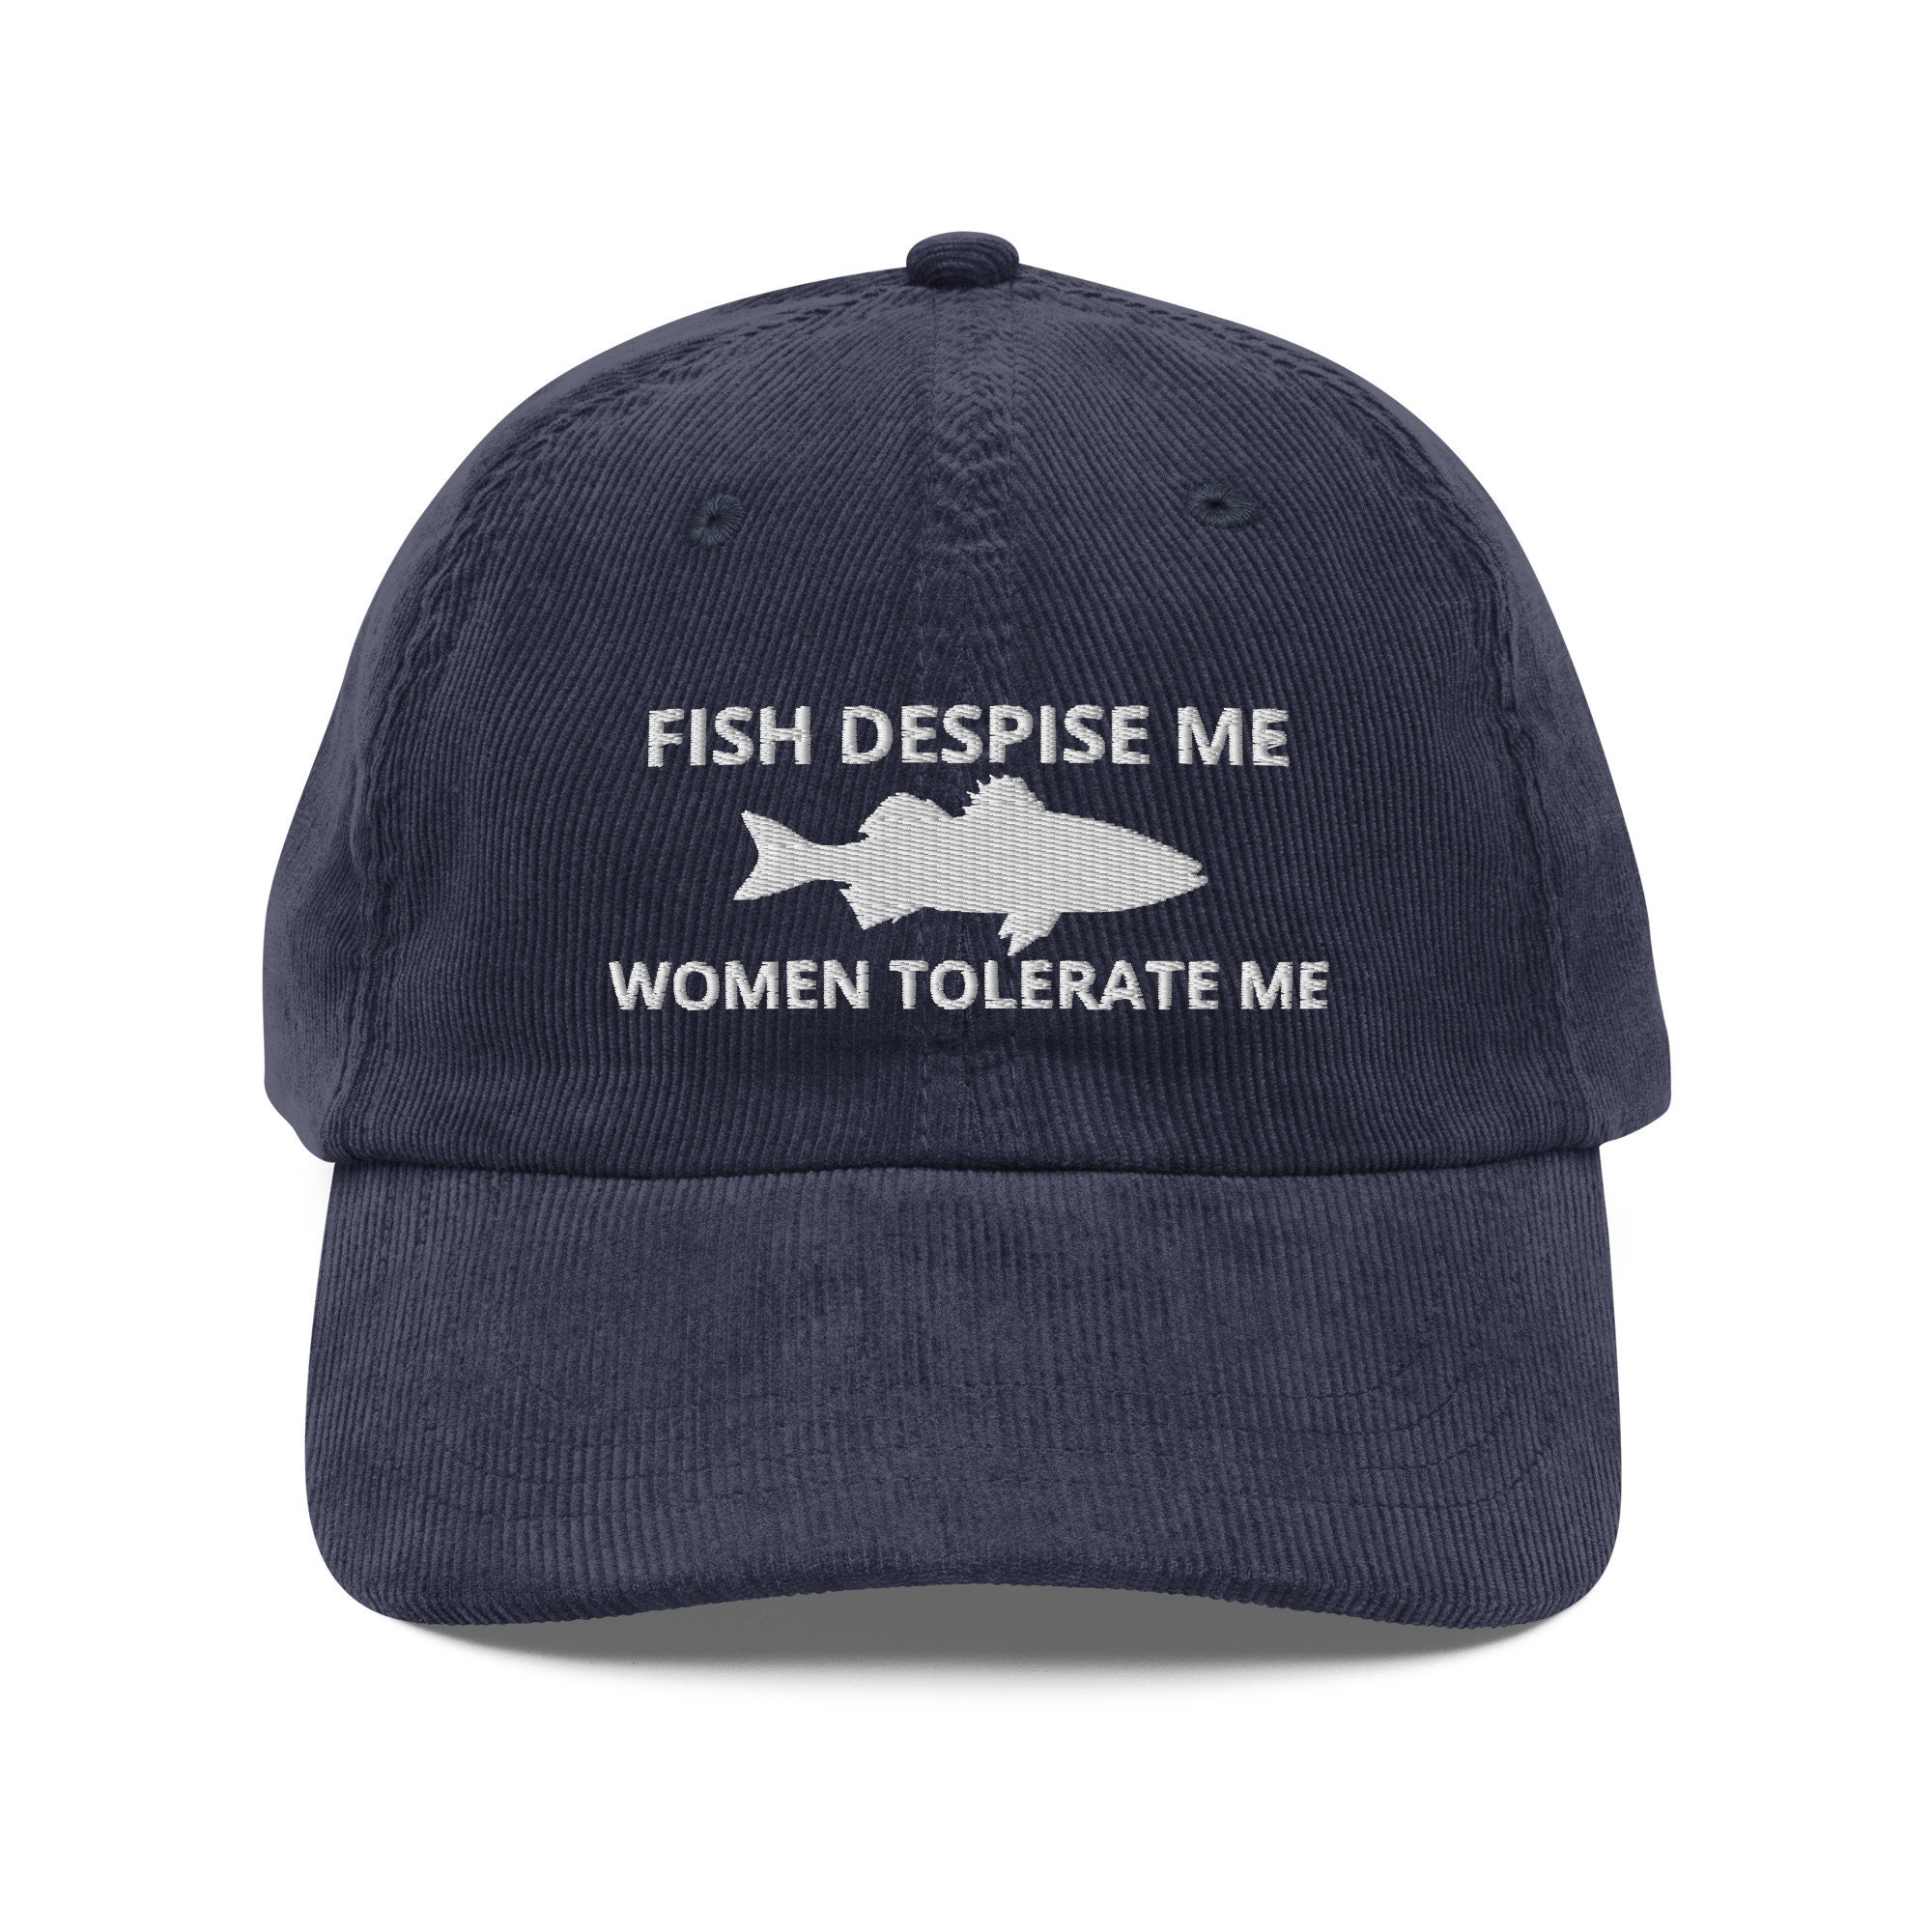 Fish Despise Me Women Tolerate Me Embroidered Corduroy Hat Gift for Fishing  Lovers, Fishing Lovers Gift, Funny Hat Vintage Corduroy Cap -  Denmark